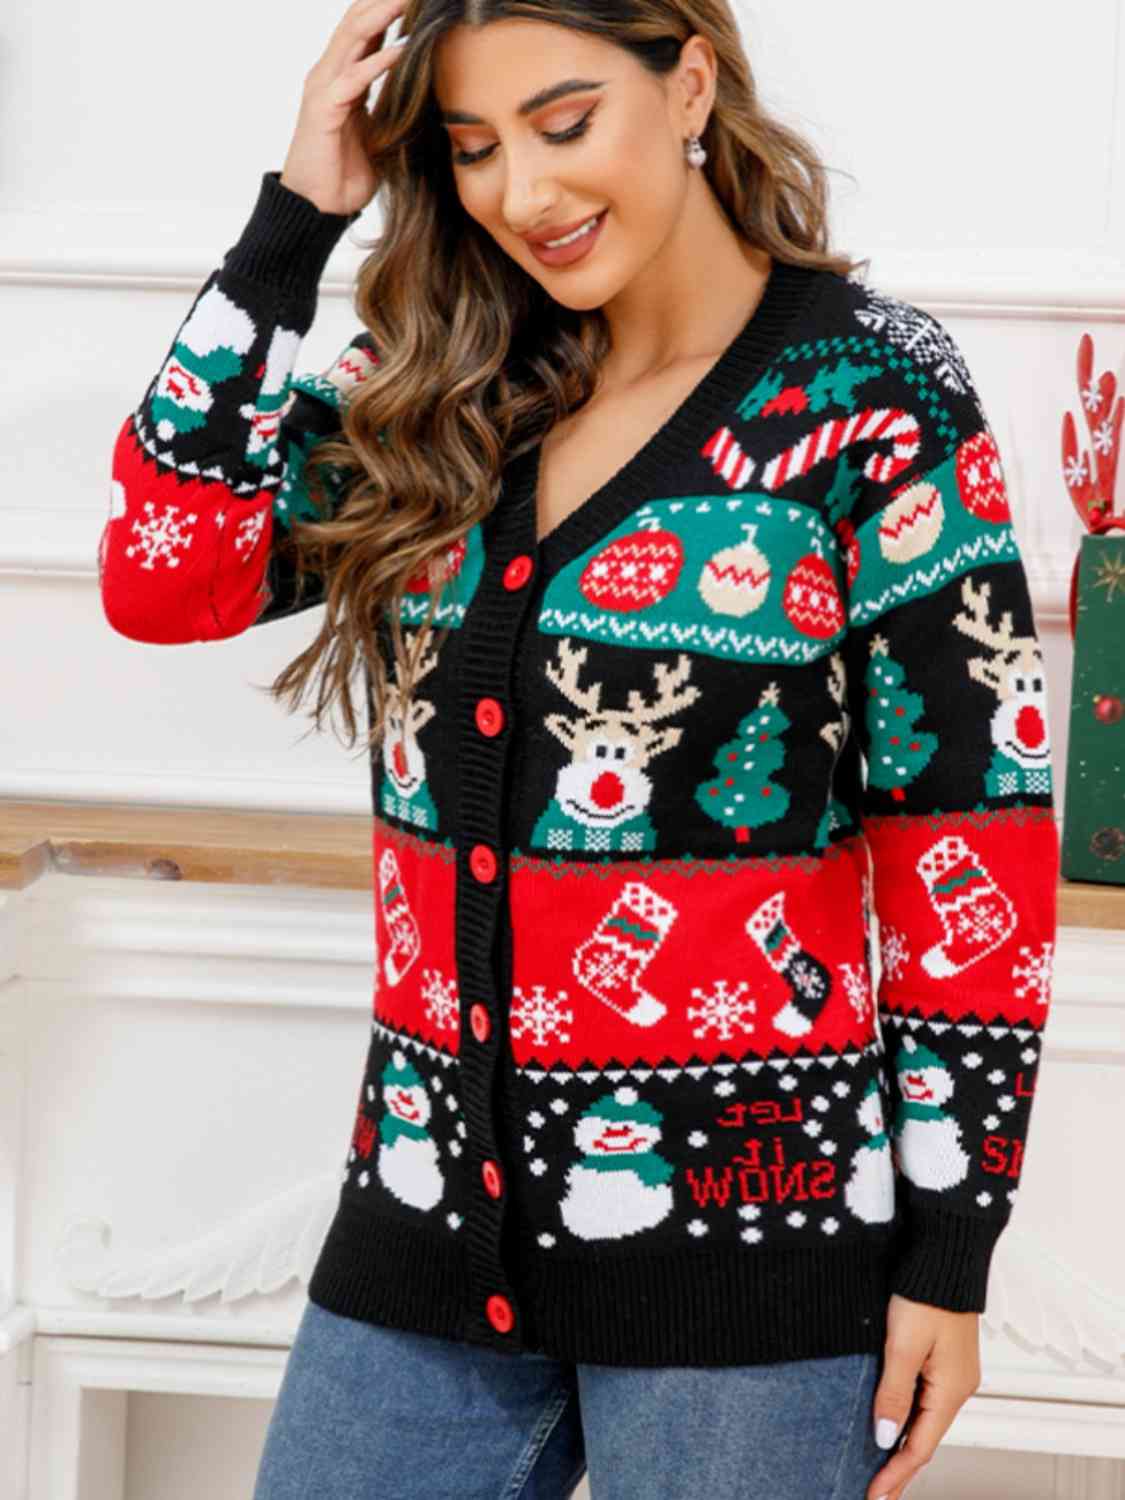 Christmas Let it Snow Long Sleeve Button Fun Colorful Knit Sweater Cardigan